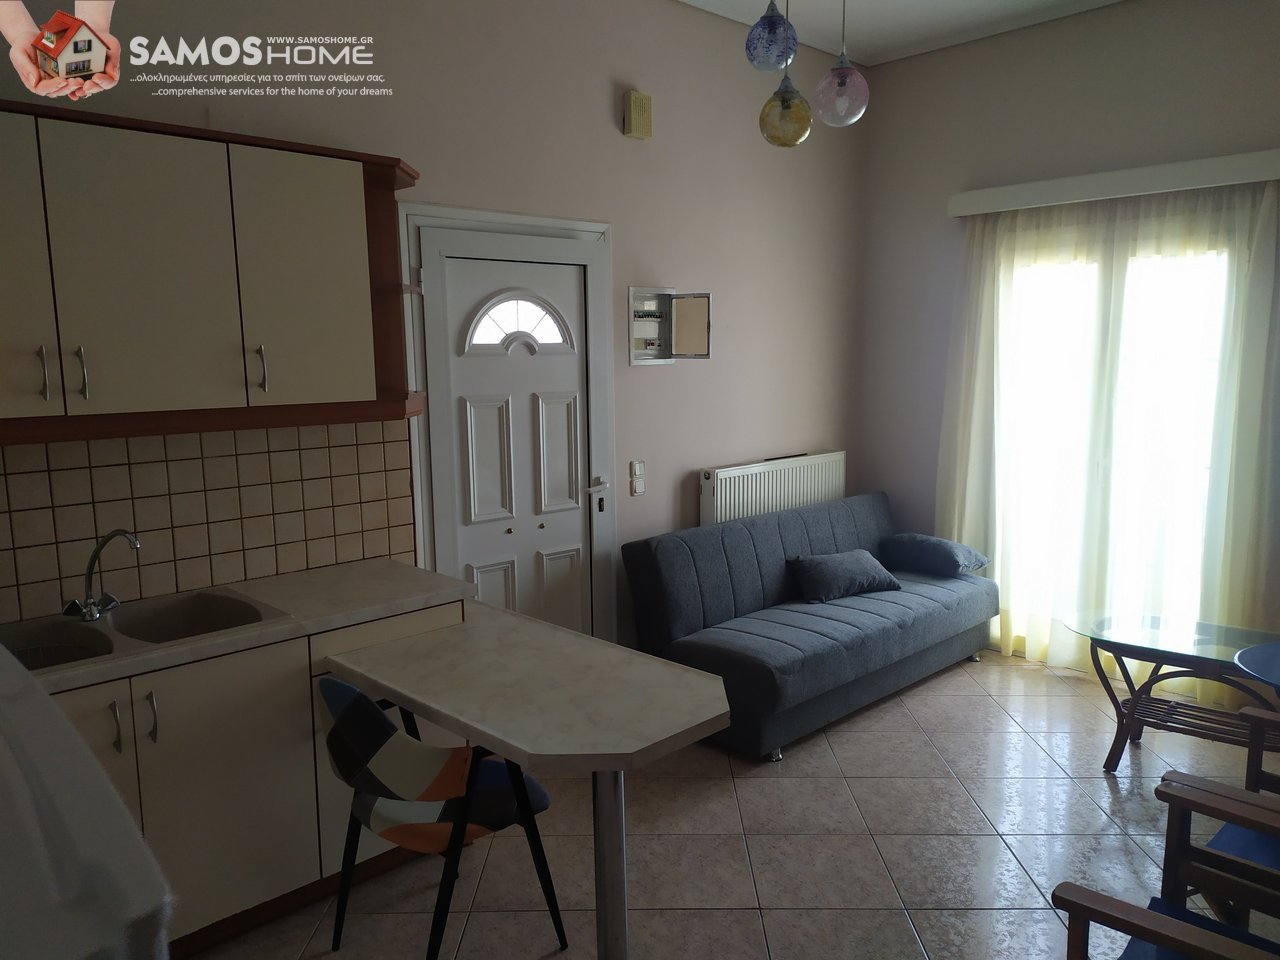 Apartment For rent - Samos